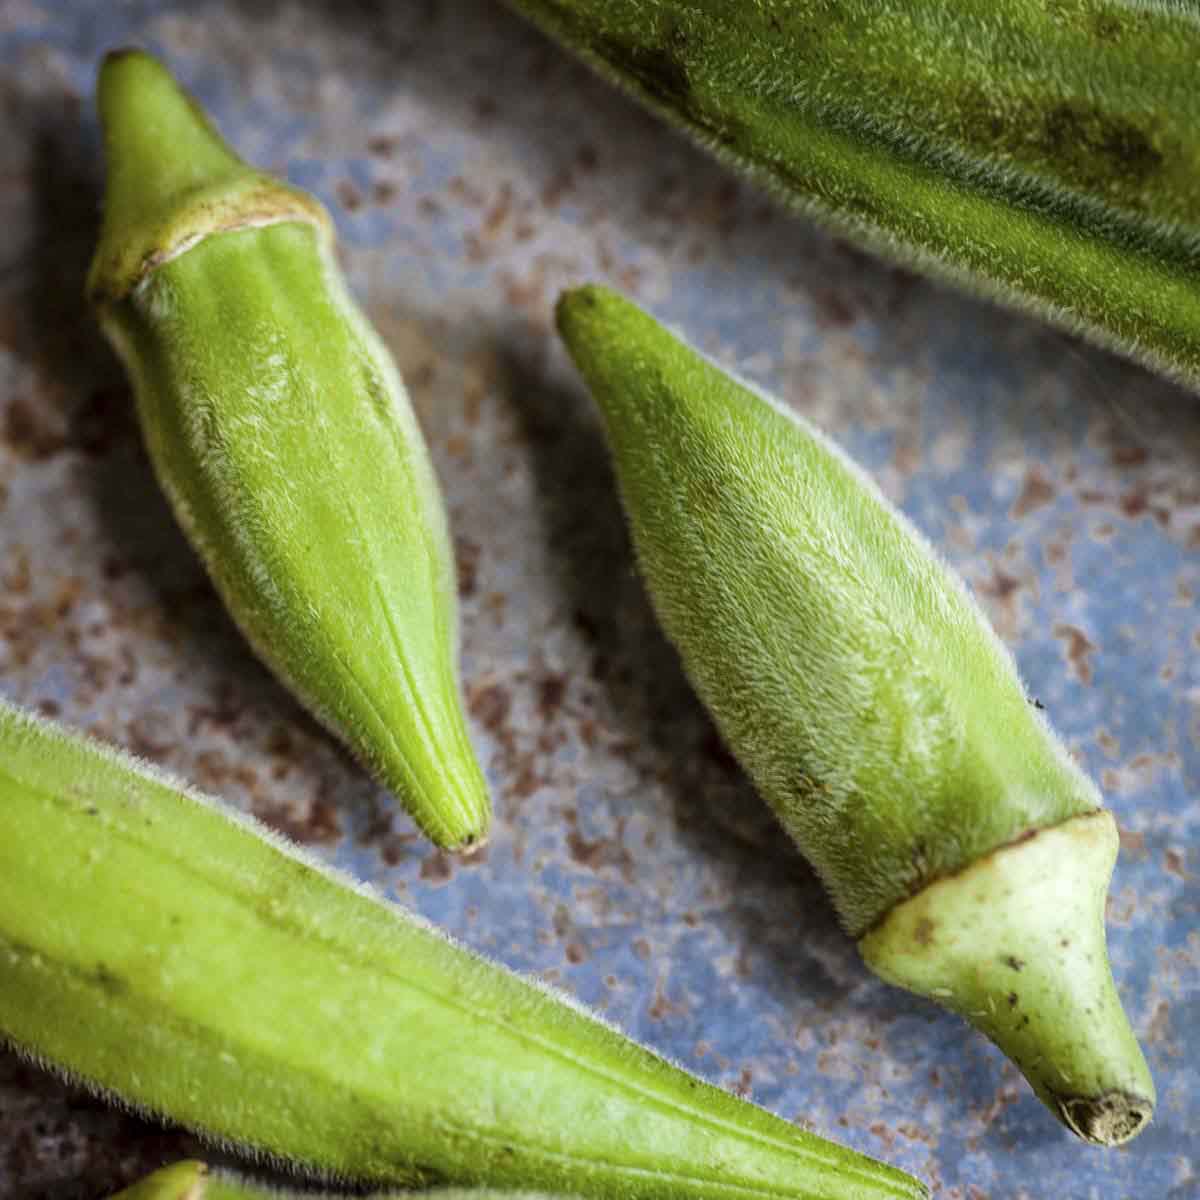 Okra placed on table.